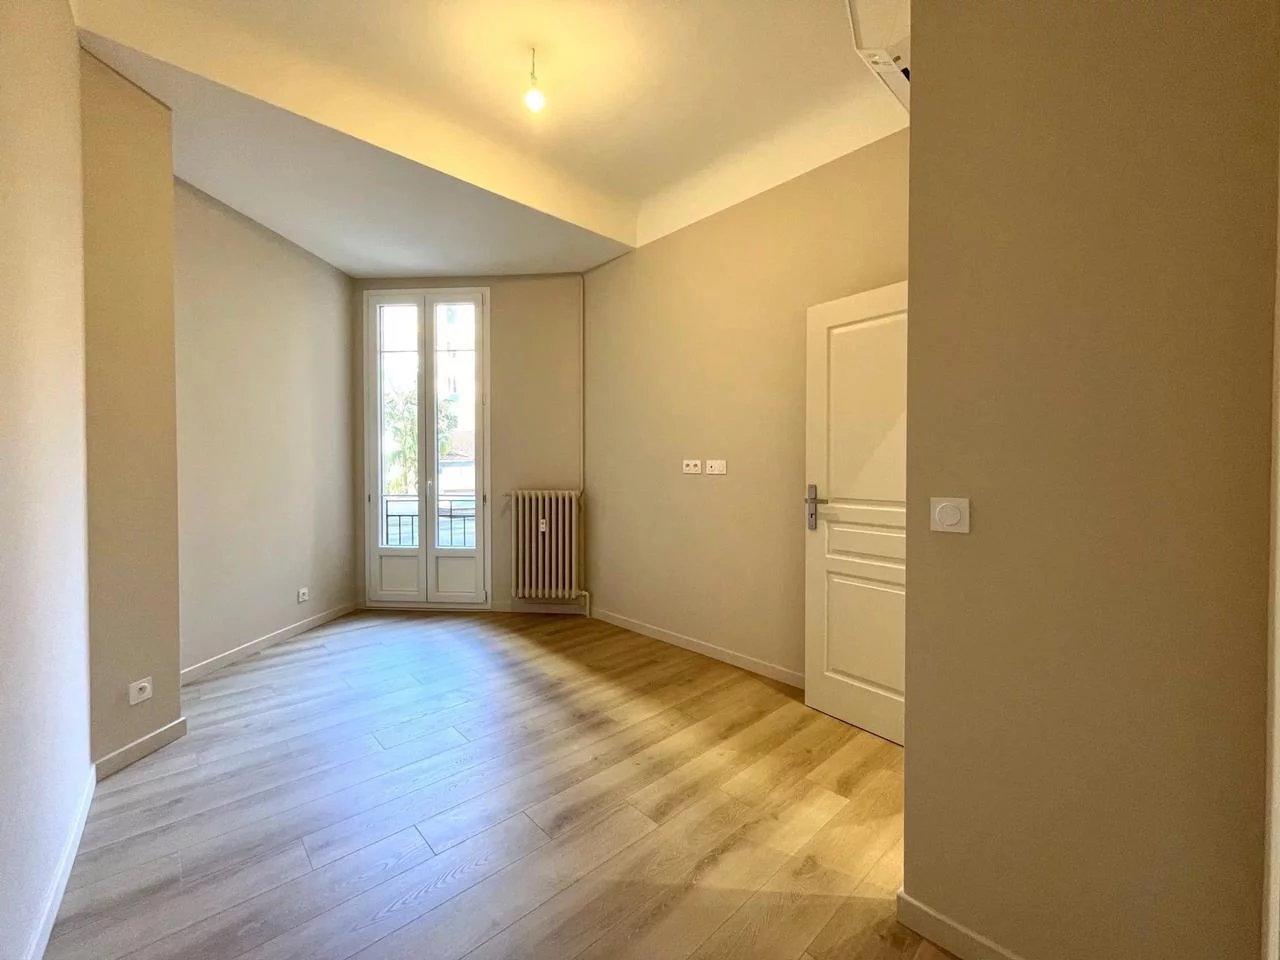 Appartement  3 Rooms 73.33m2  for sale   299 500 €